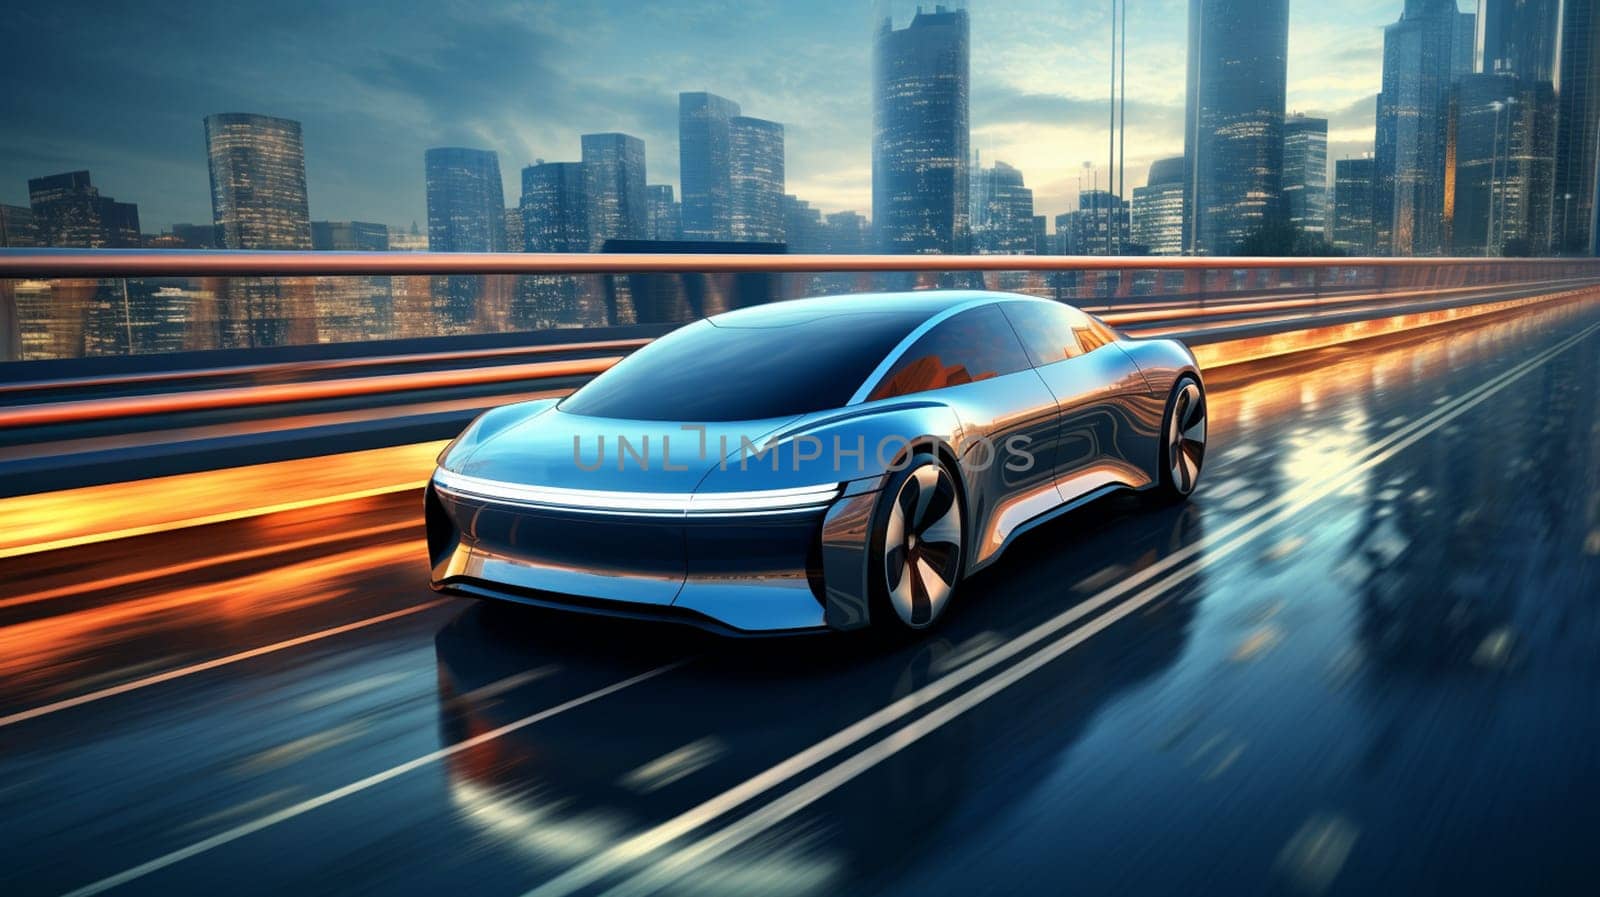 Autonomous Self-Driving 3D Car Moving Through City Highway. Visualization Concept: AI Sensor Scanning Road Ahead for Vehicles, Danger, Speed Limits. Day Urban Driveway. Front Following View by Andelov13